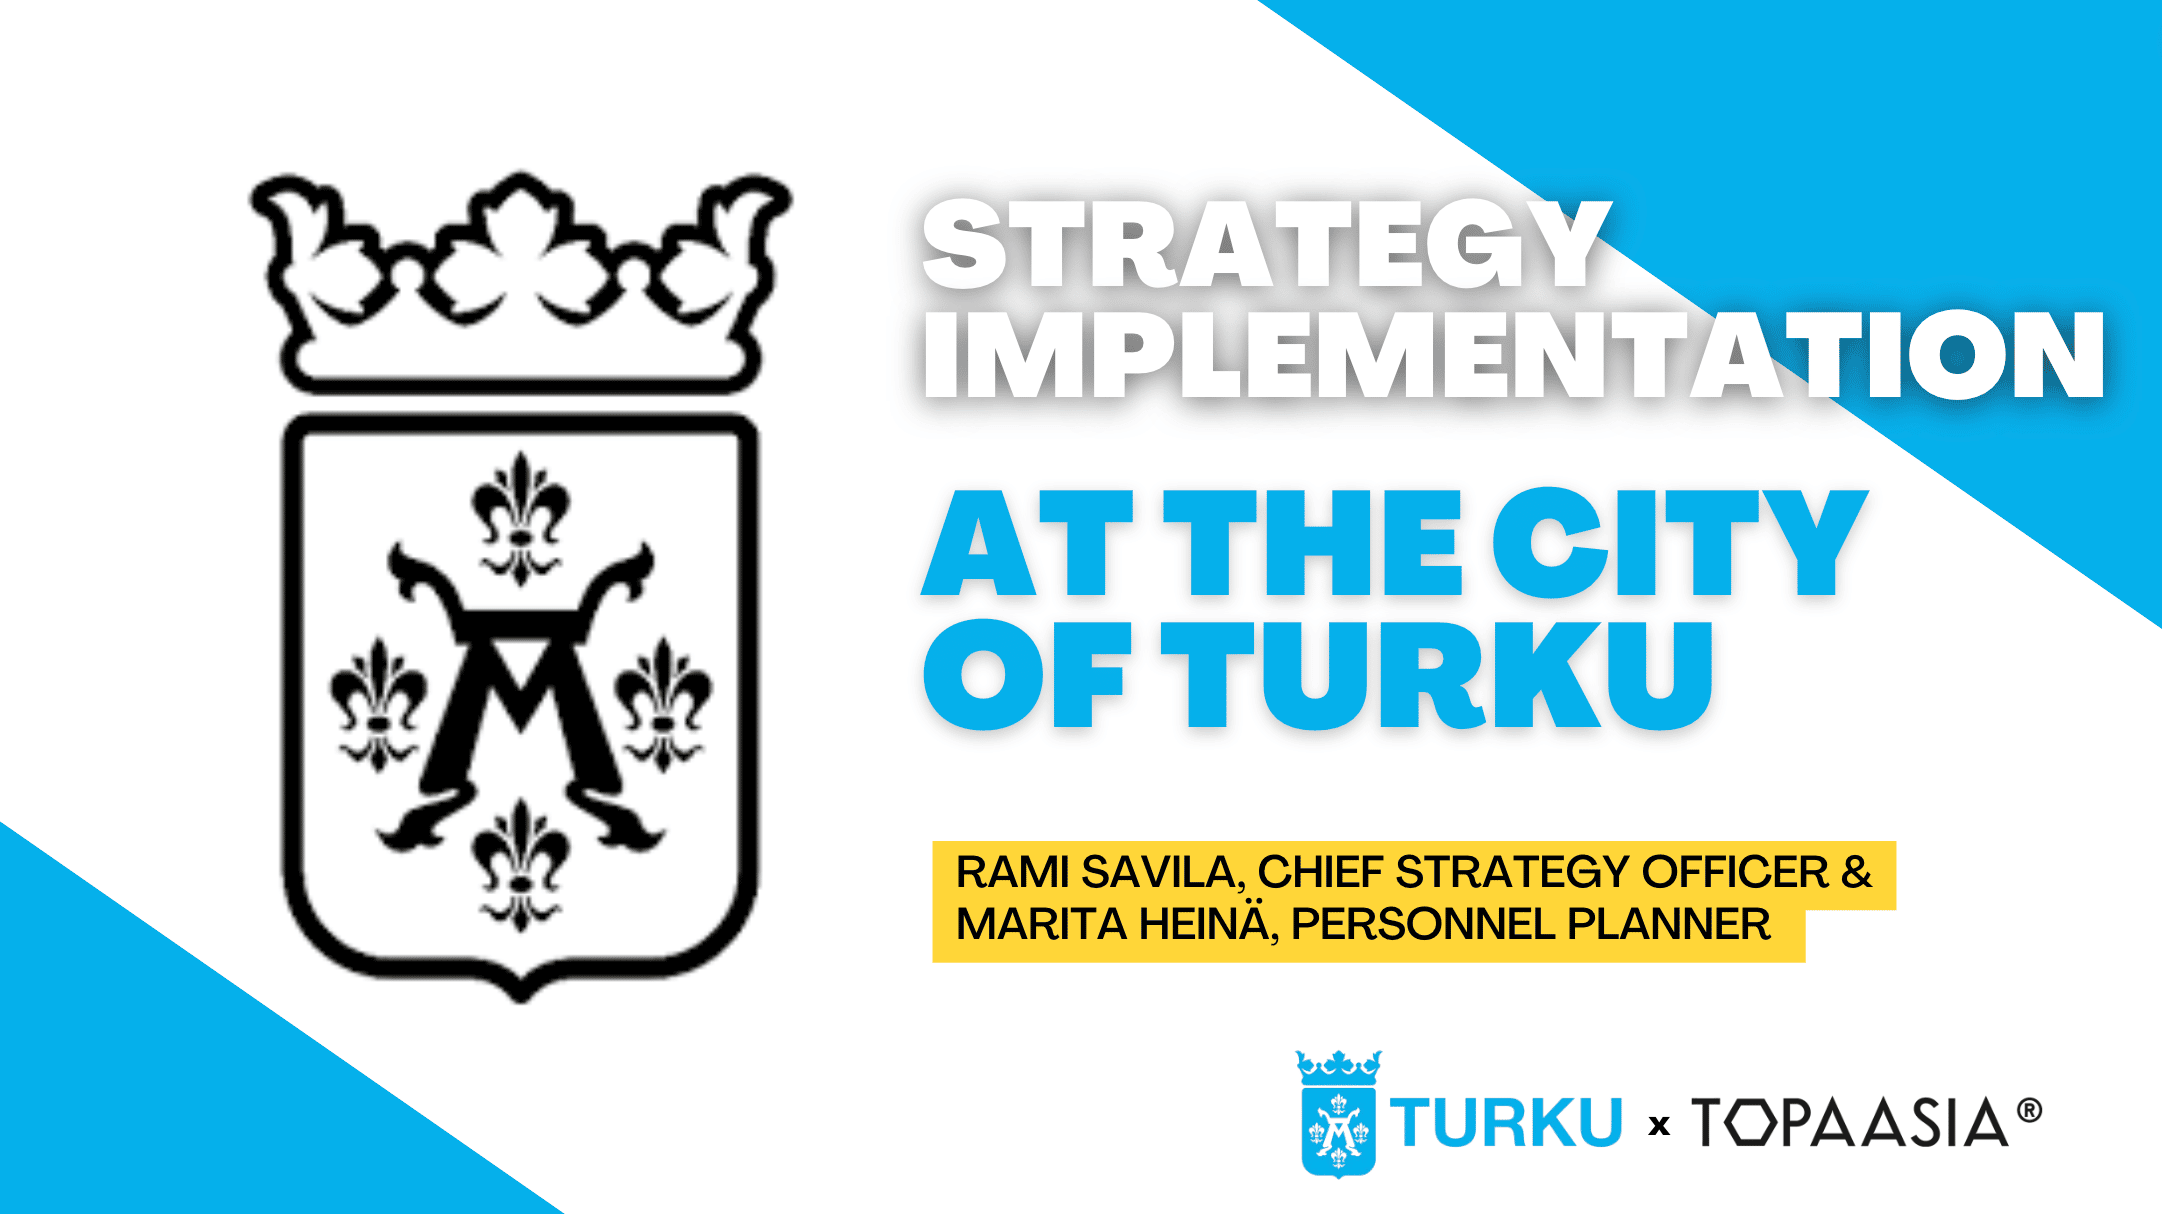 Implementation of the strategy in the City of Turku - Topaasia®